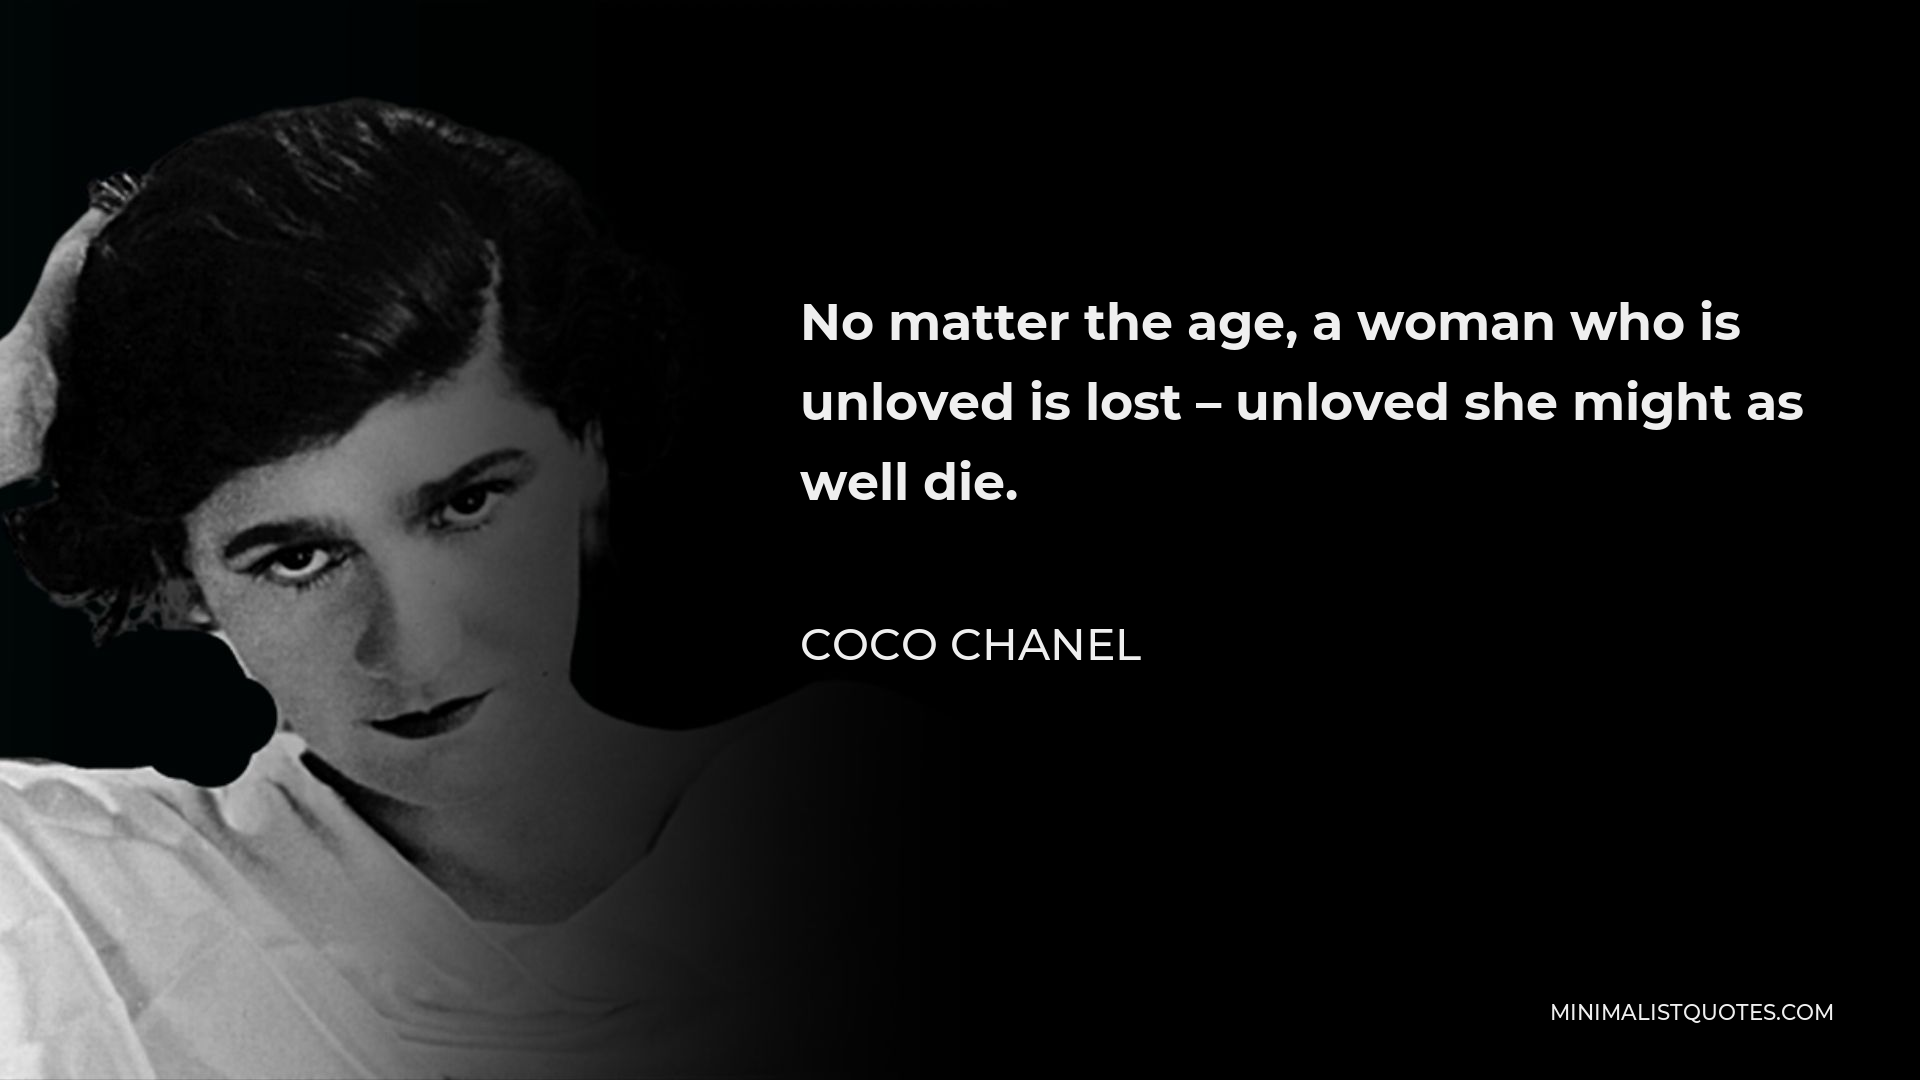 Coco Chanel Quote - No matter the age, a woman who is unloved is lost – unloved she might as well die.